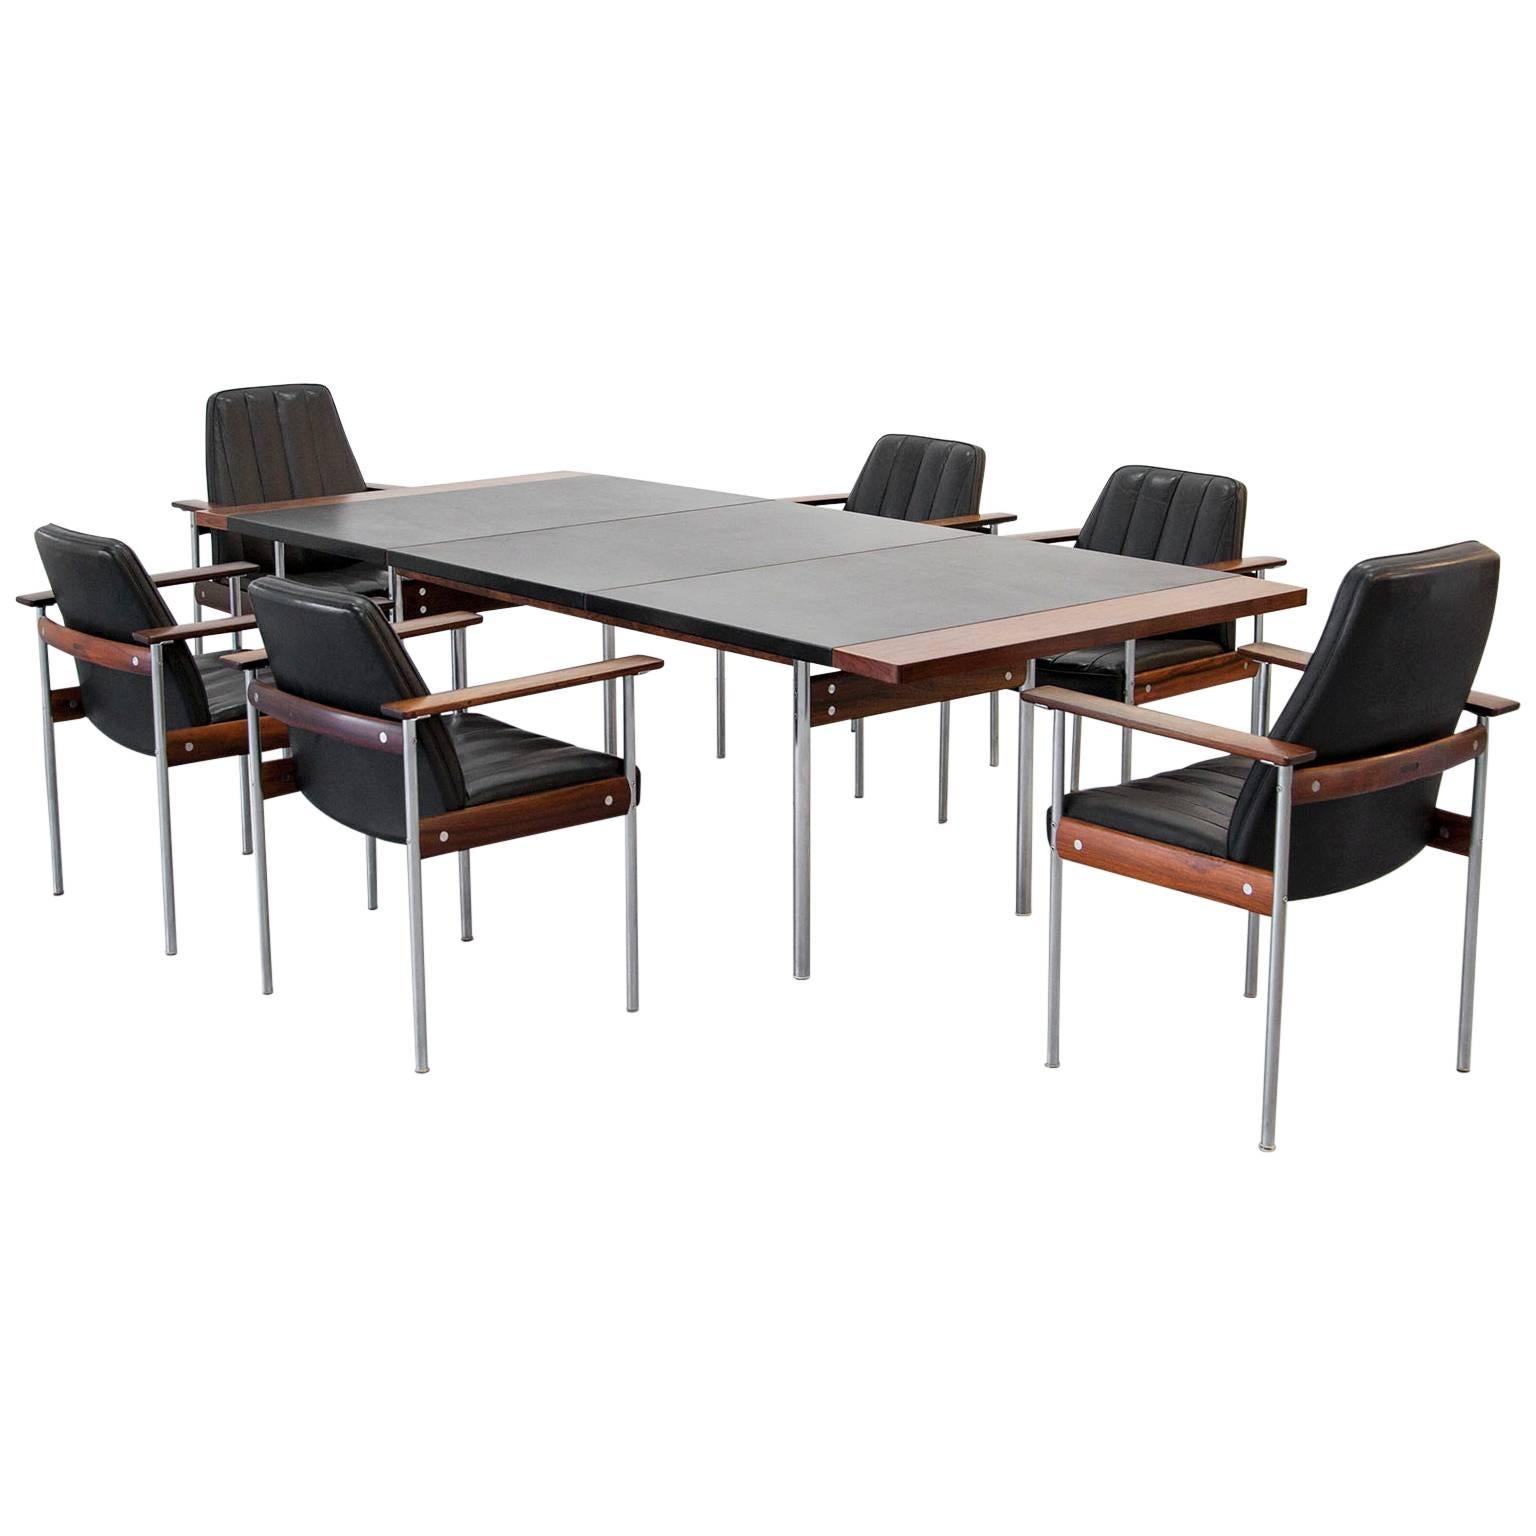 Dining or Conference Group by Sven Ivar Dysthe for Dokka, Six Chairs and Table For Sale